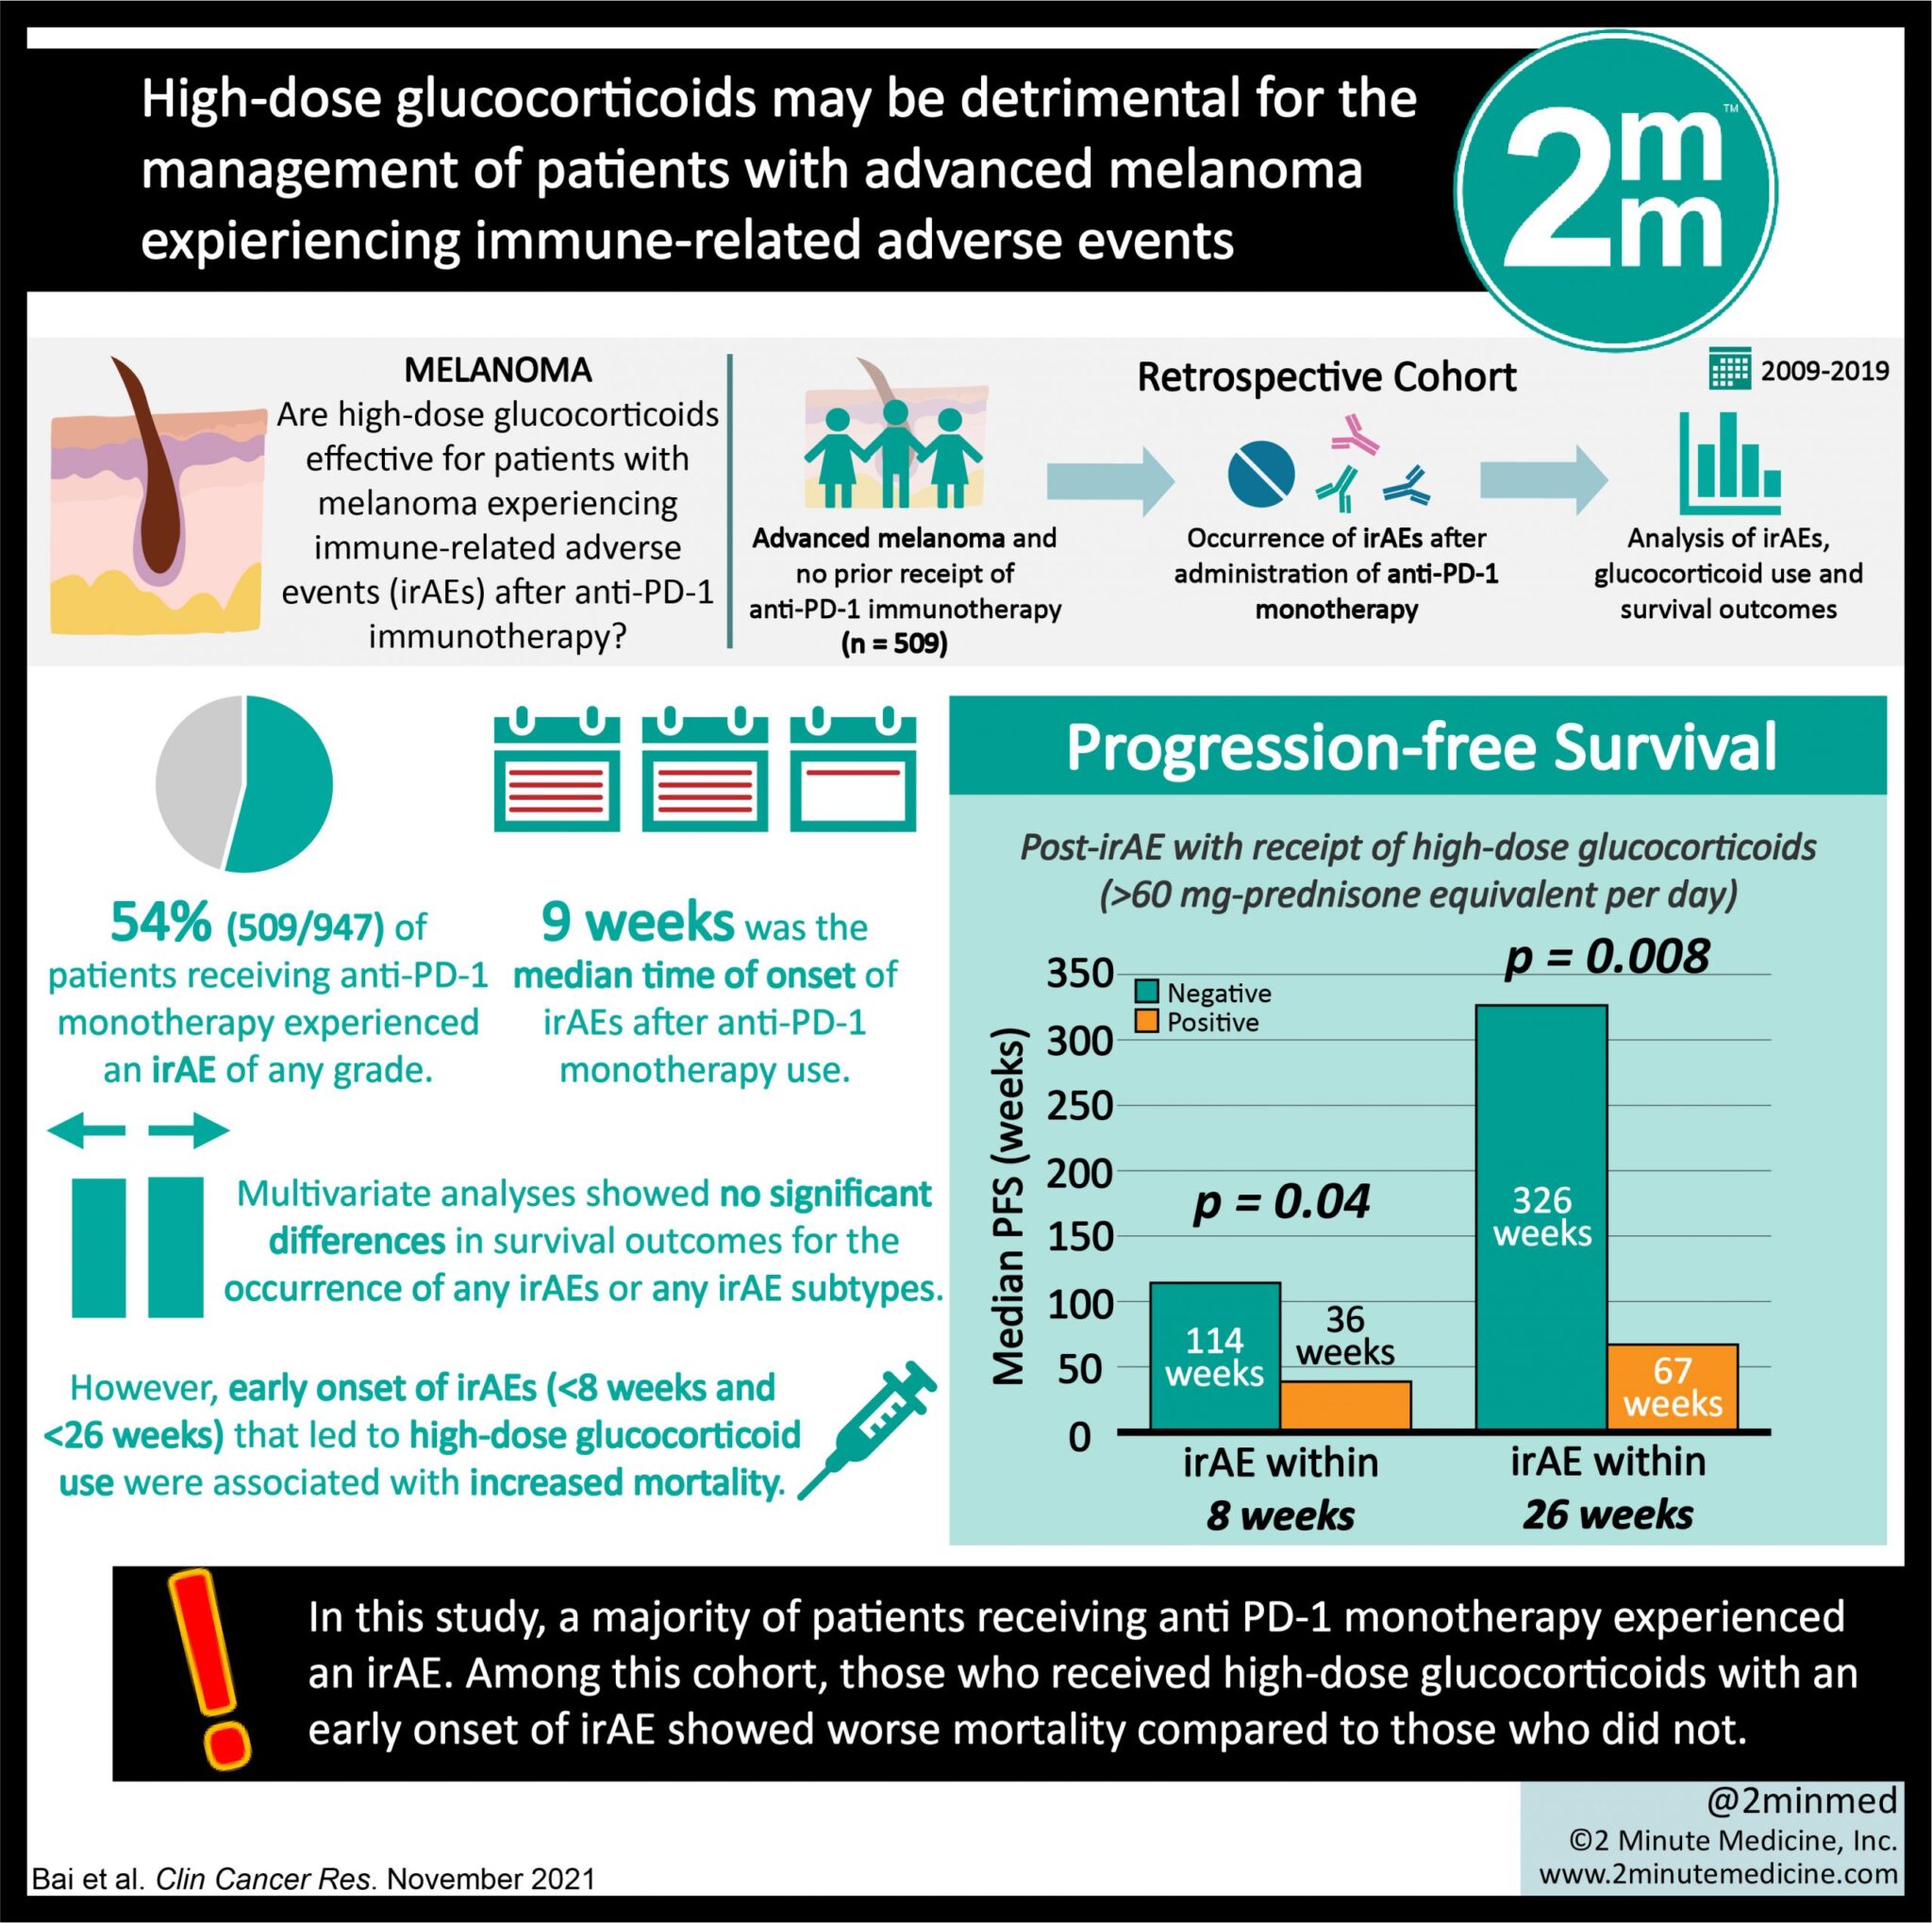 #VisualAbstract: High-dose glucocorticoids may be detrimental for the ...